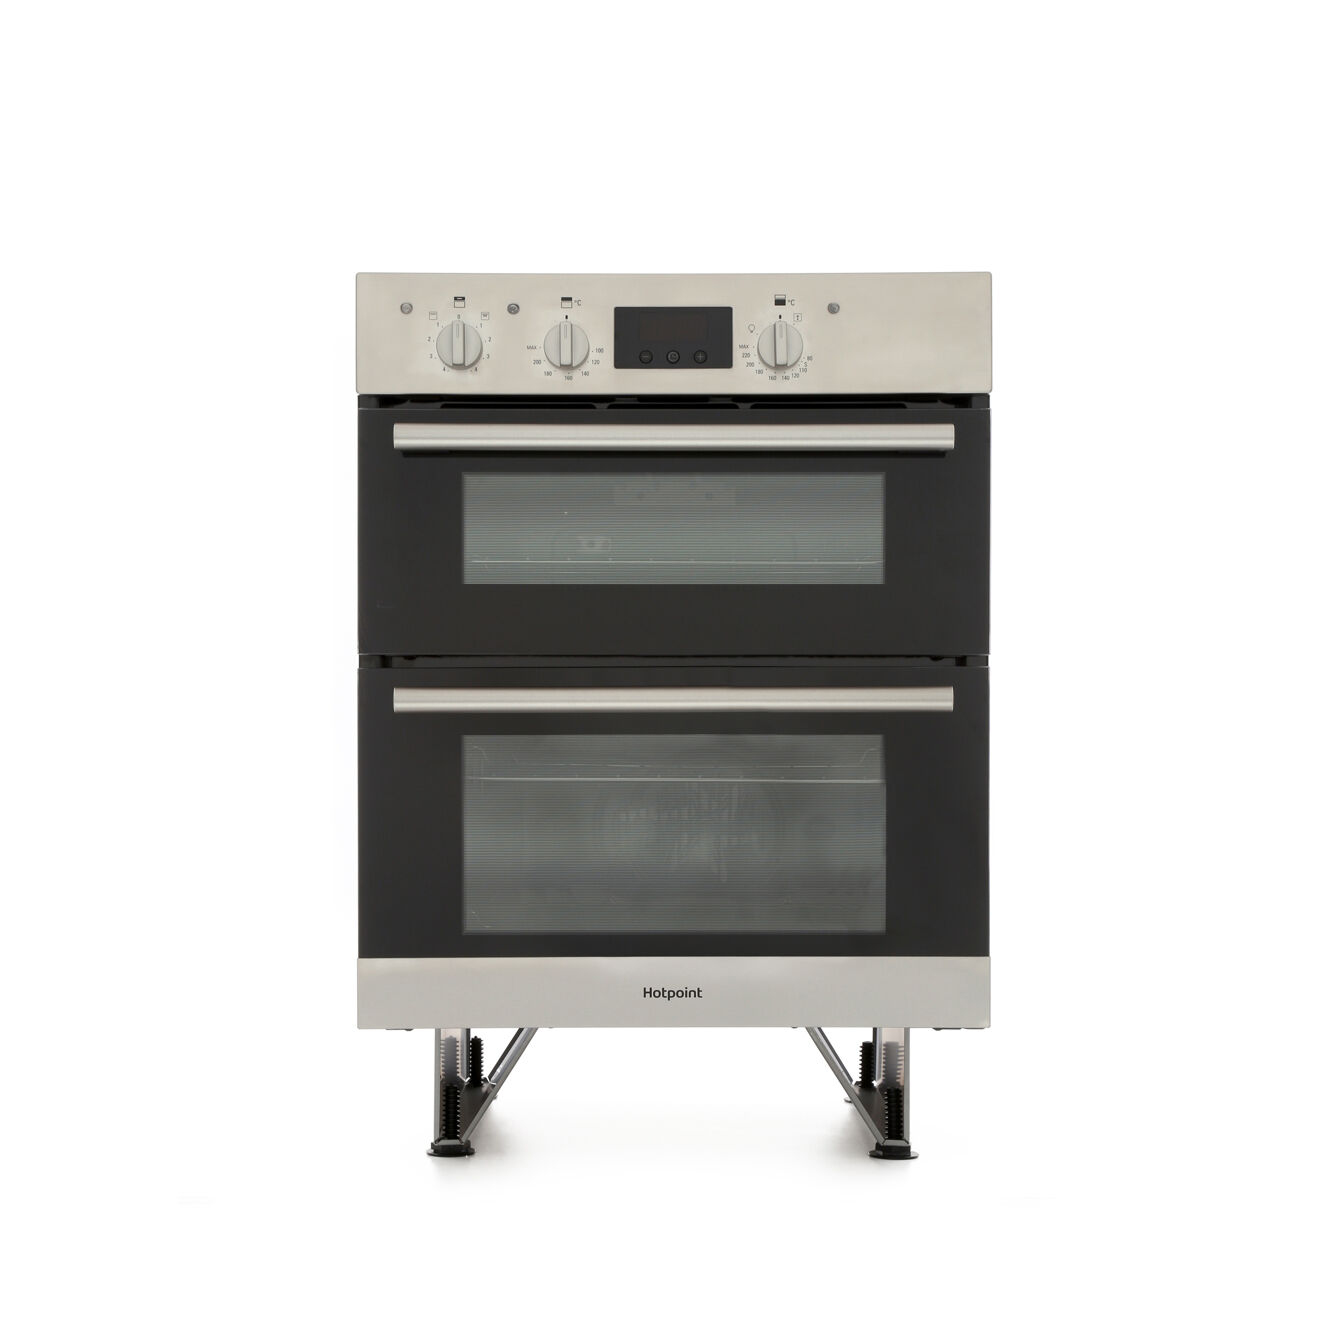 Hotpoint DU2 540 IX Double Built Under Electric Oven - Stainless Steel